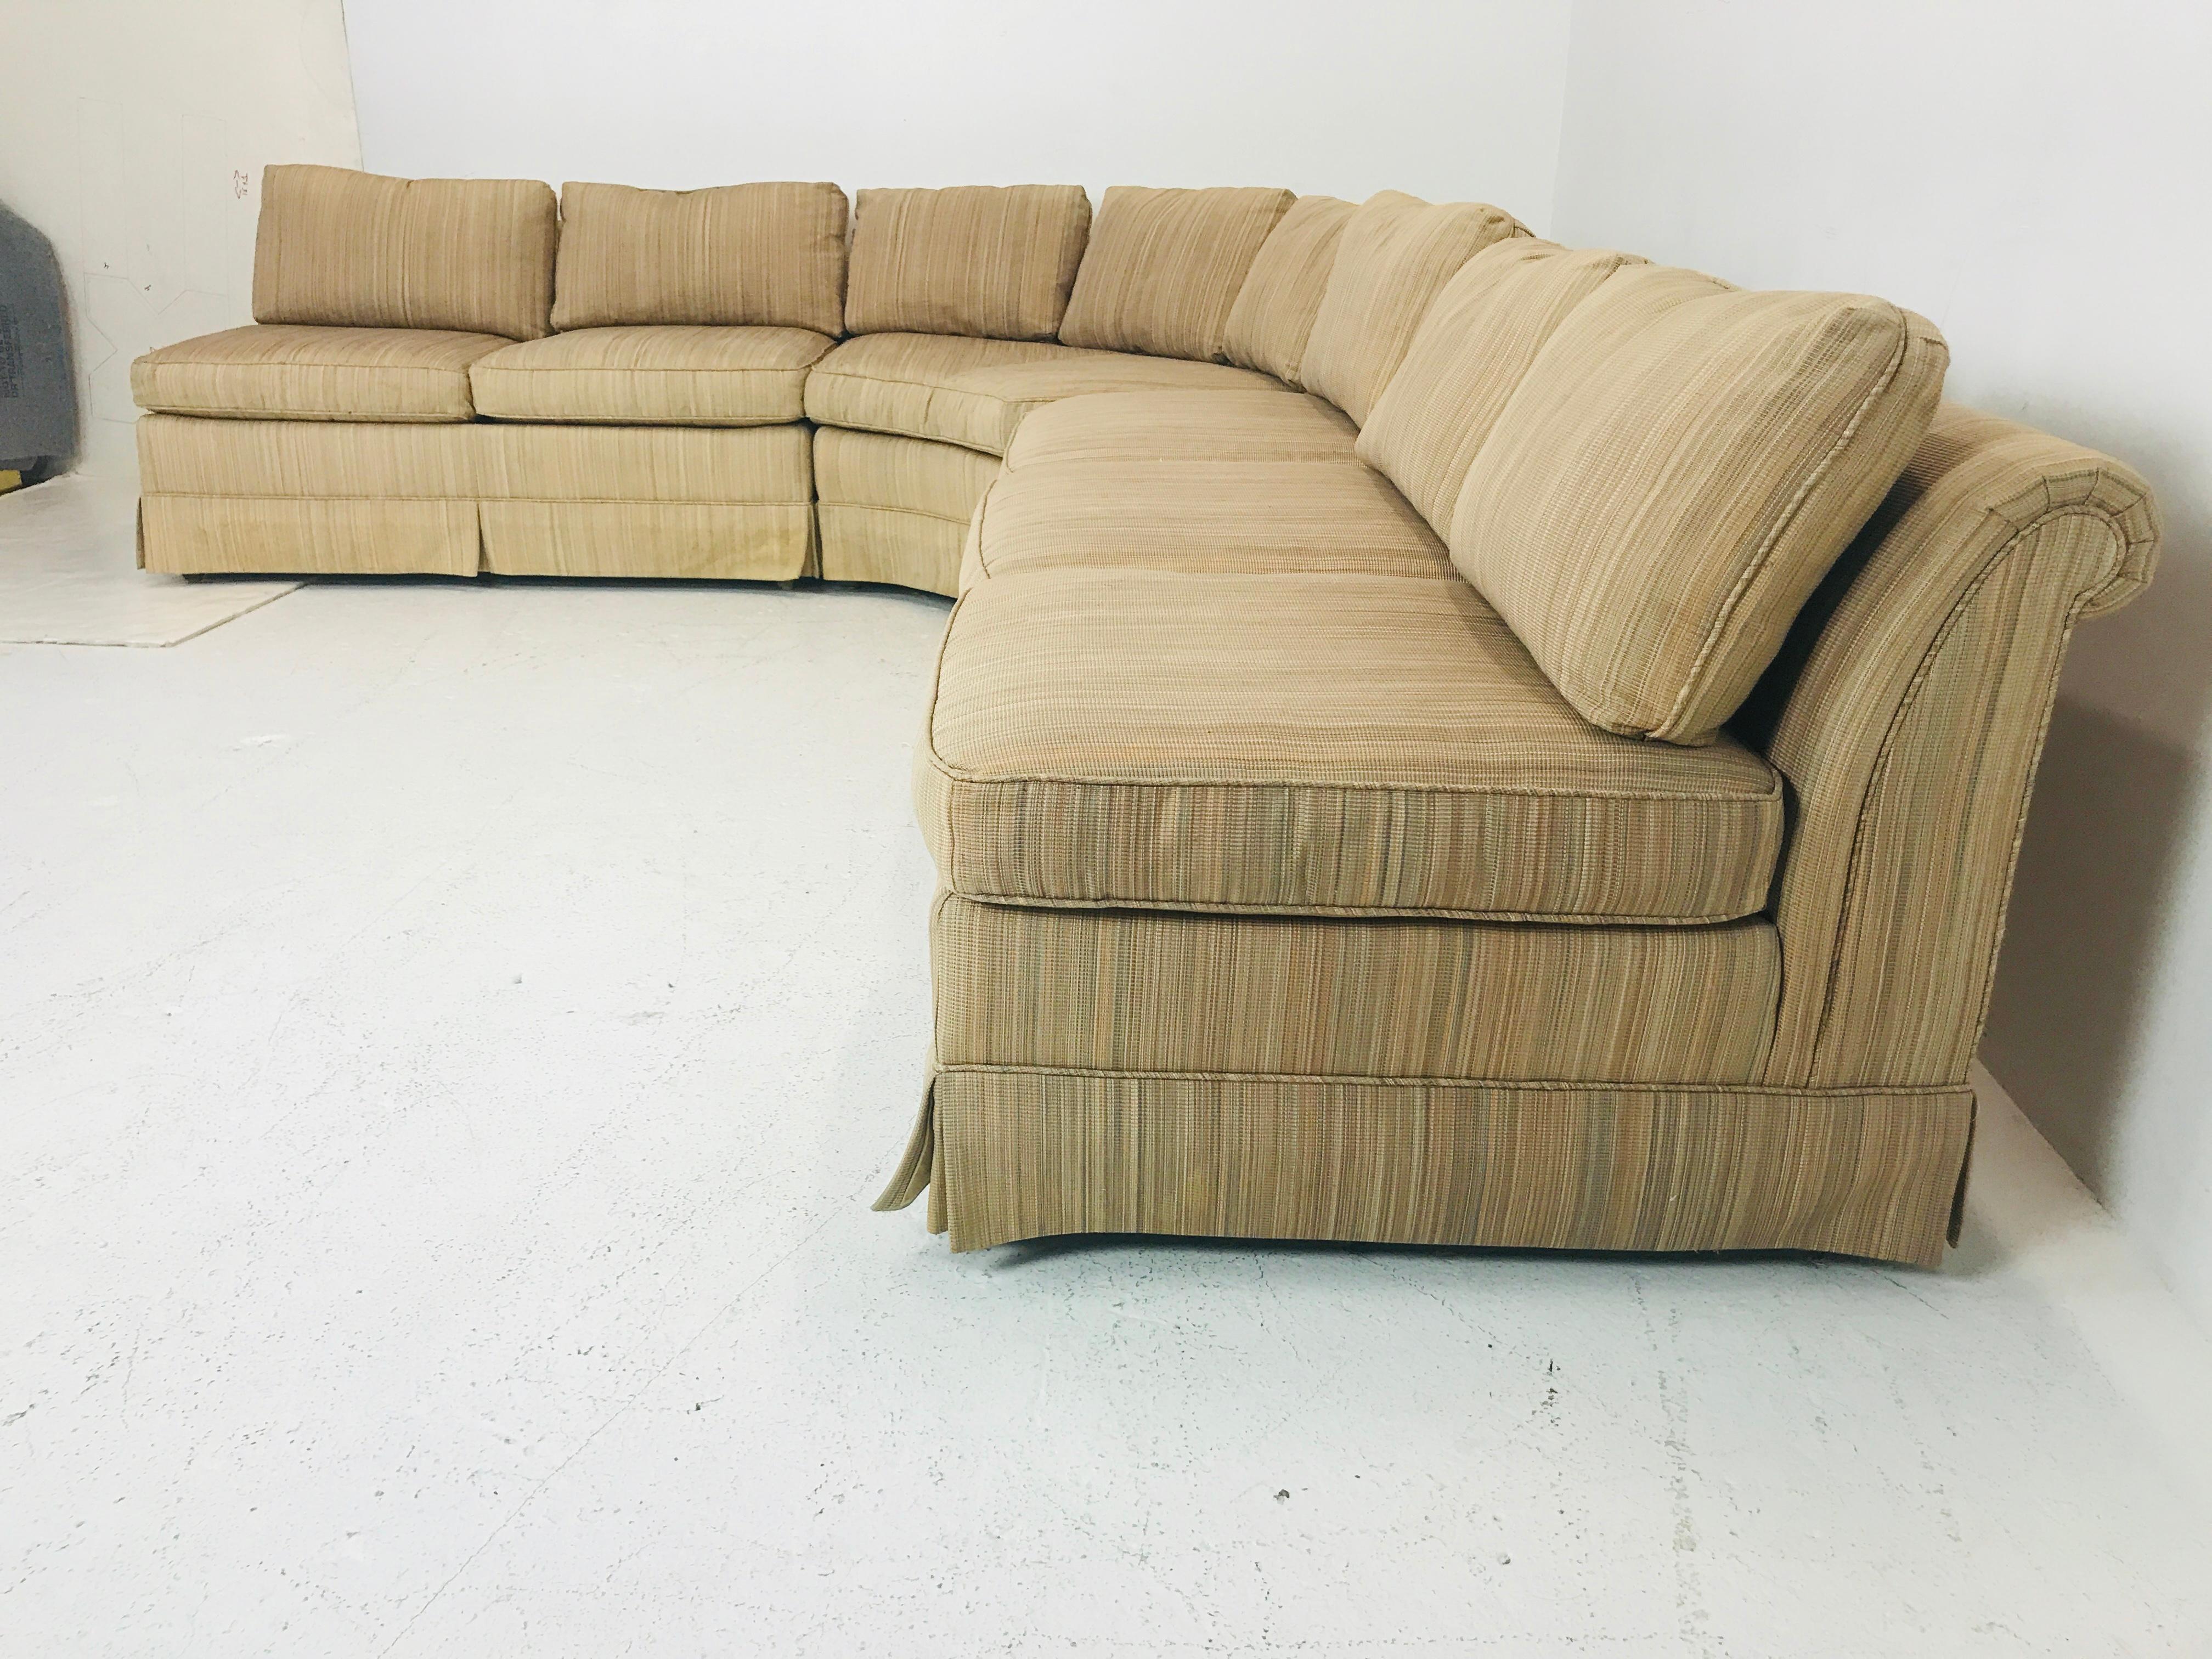 Three-piece midcentury slipper sofa by Baker. Sofa is in good vintage condition with some wear from use an age. New upholstery is recommended.

Dimensions:
129 W x 35 D x 27 T
Seat height 18
Return 101